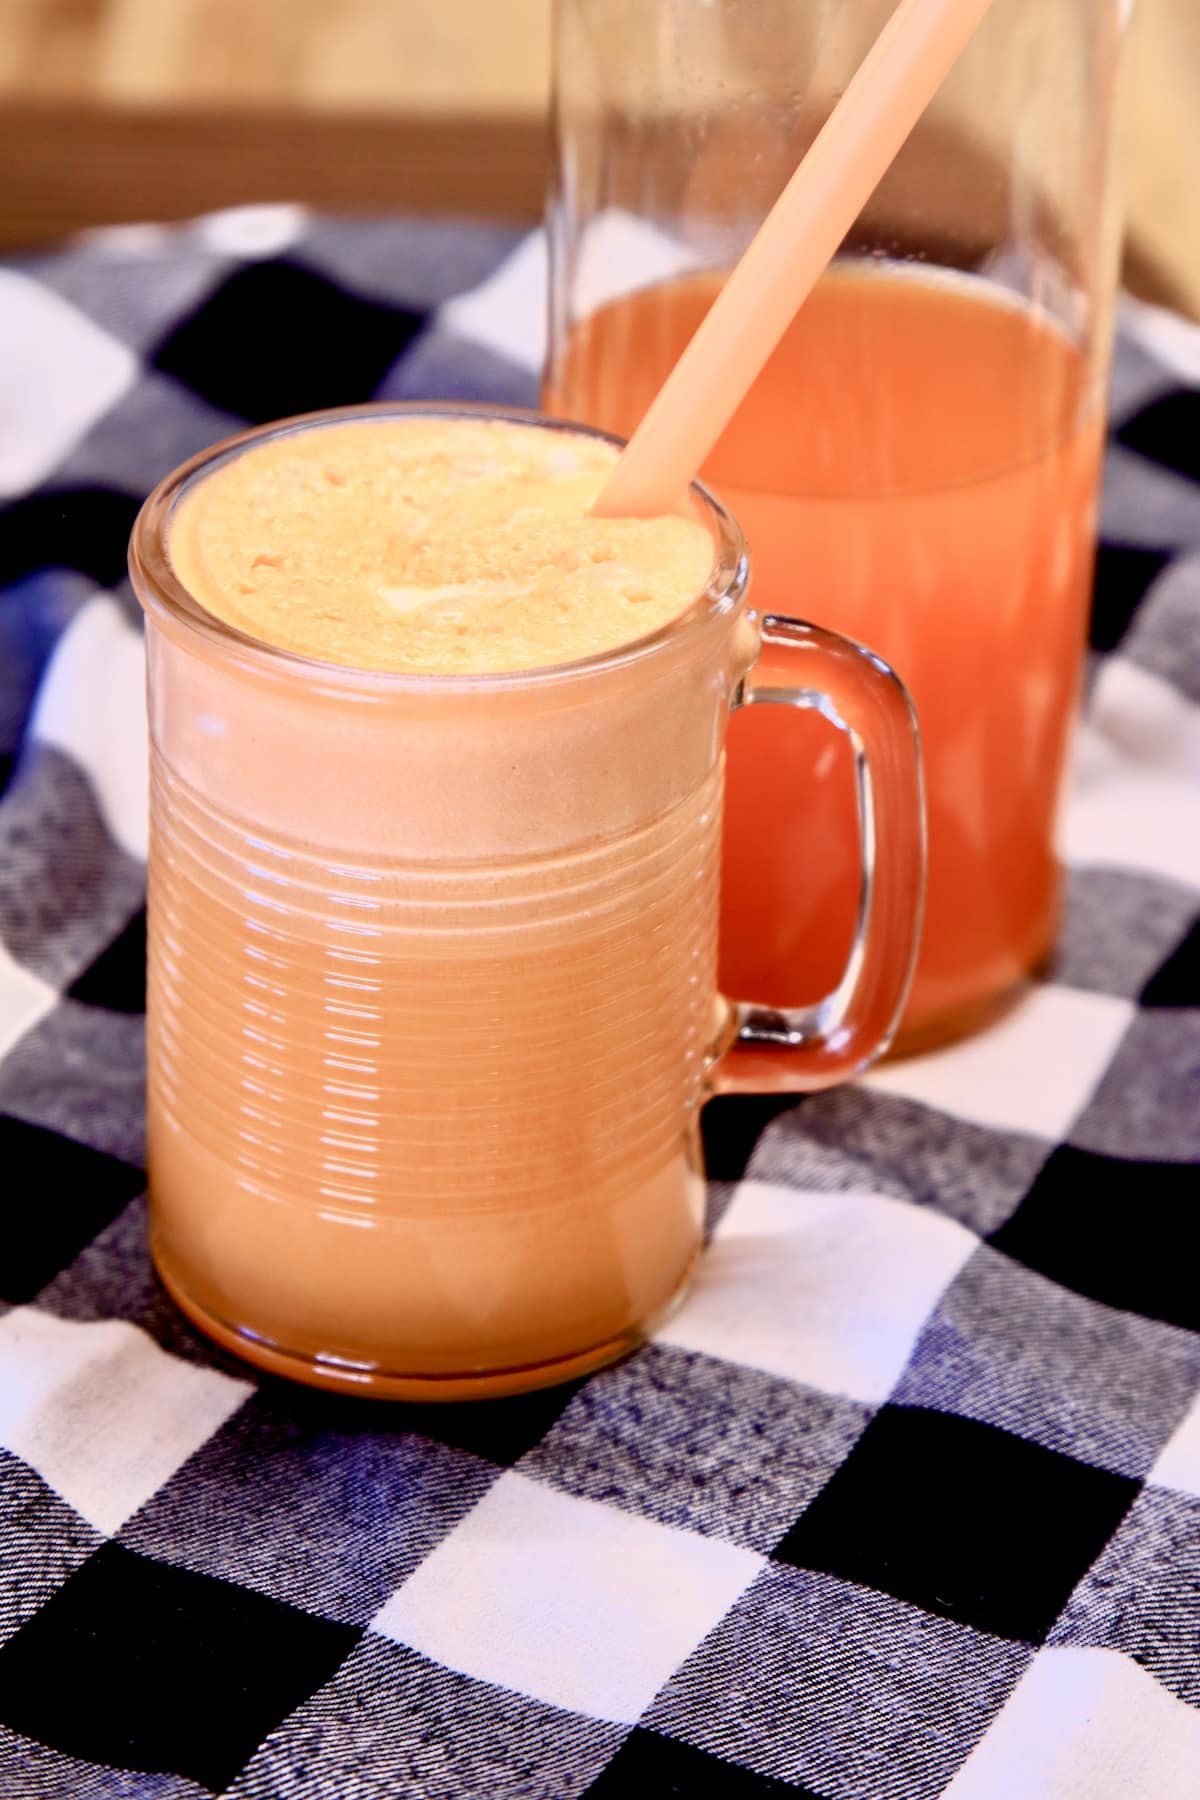 Orange punch in a mug with straw, pitcher in background.